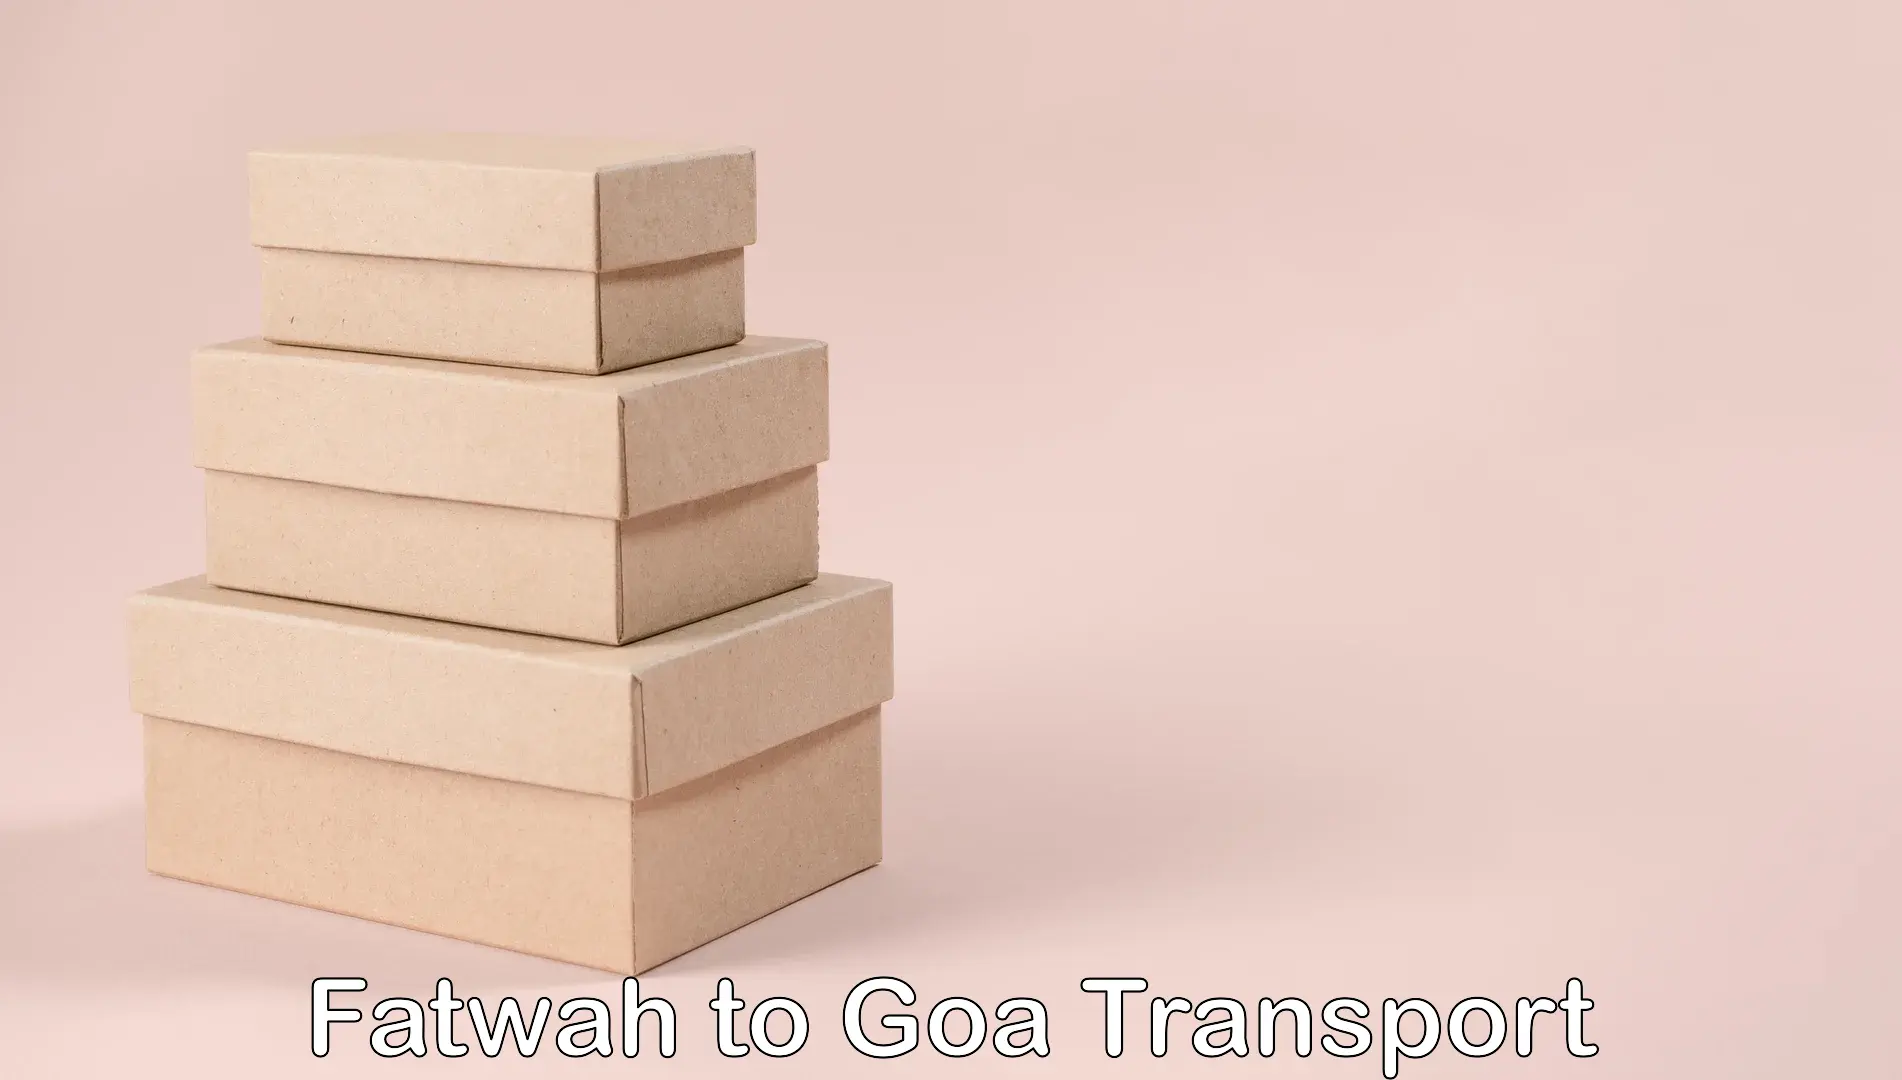 Transport shared services Fatwah to Goa